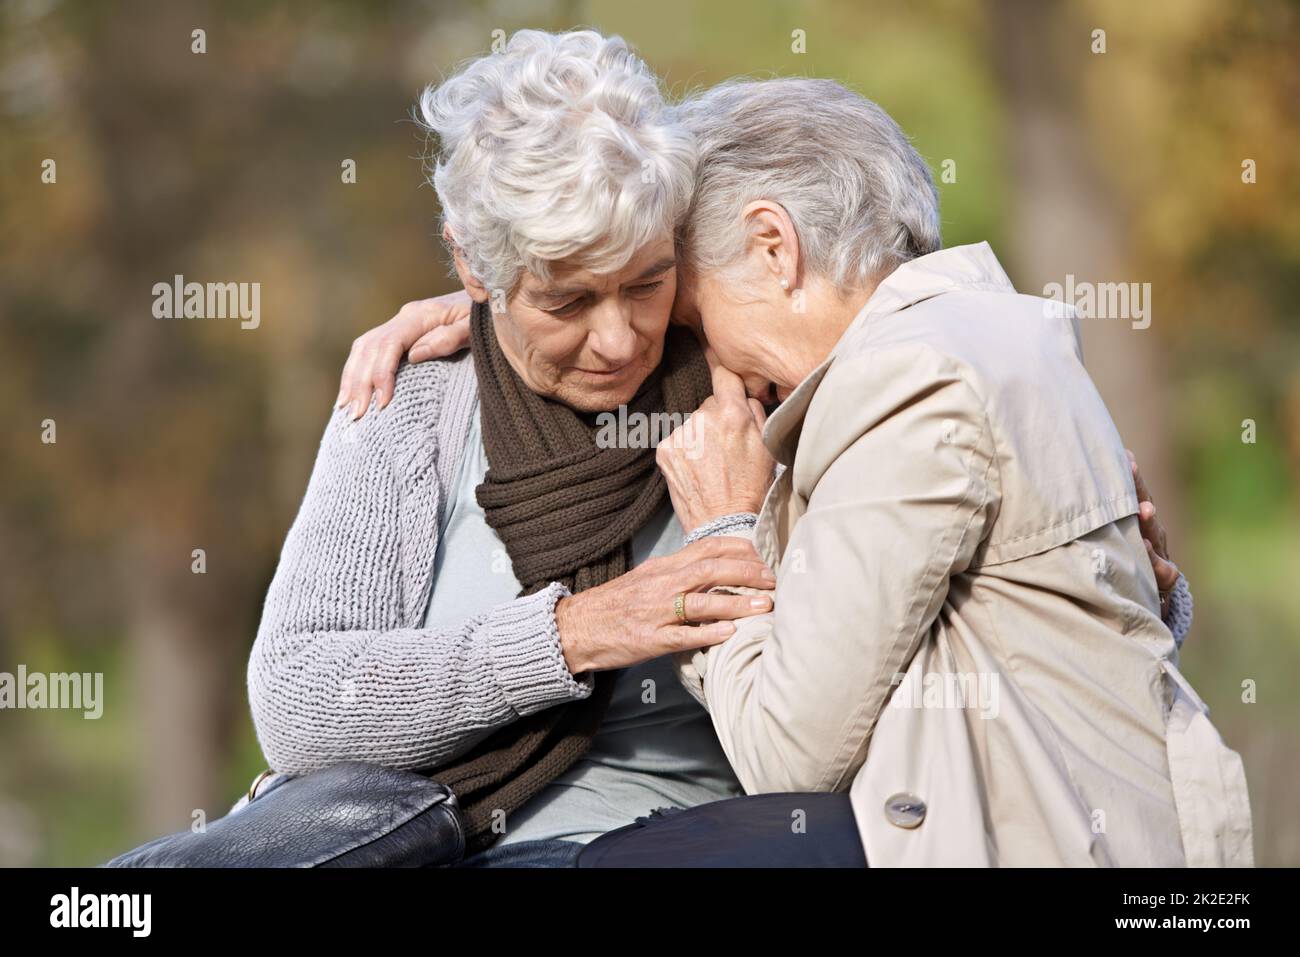 Im here for you.... Cropped view of a senior woman caring for her friend. Stock Photo